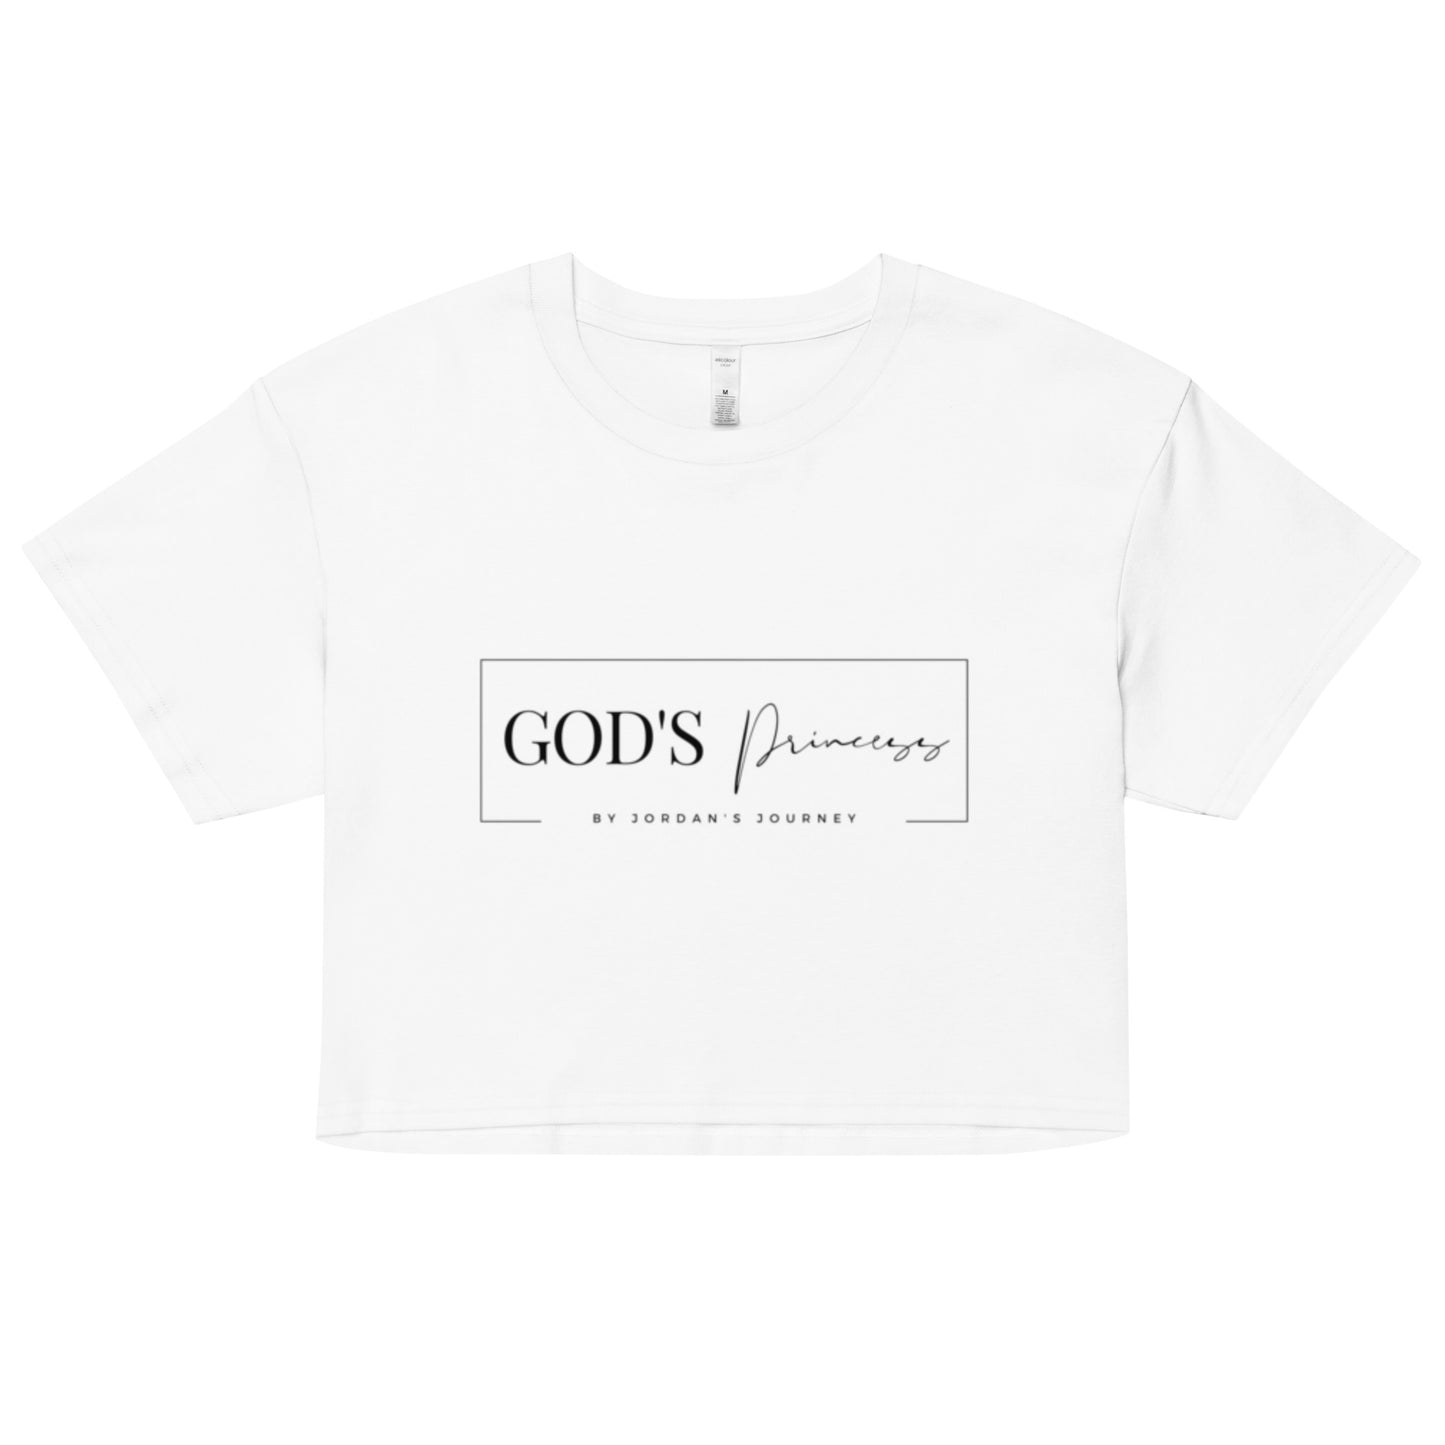 God's Princess Crop Top- White, Gray, and Nude